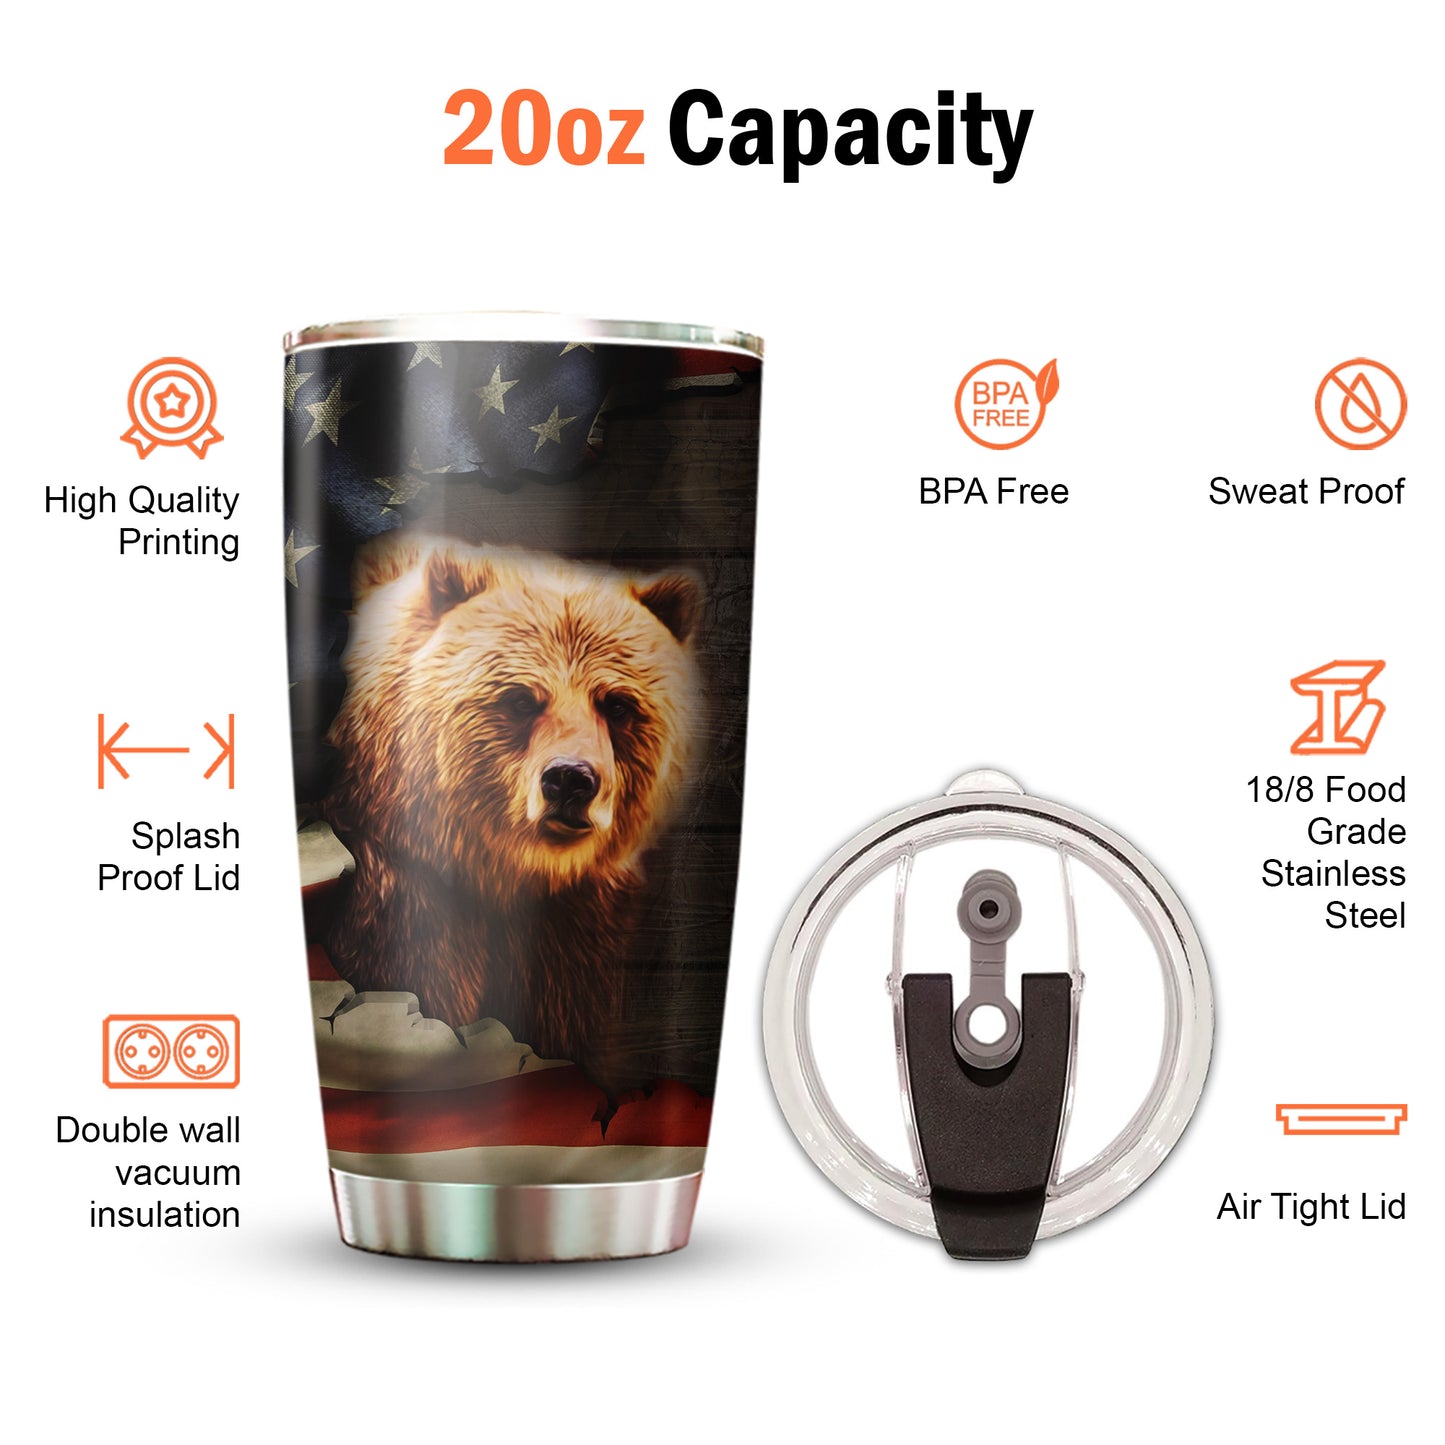 Bear Dad Being A Dad Is An Honor 20Oz Tumbler